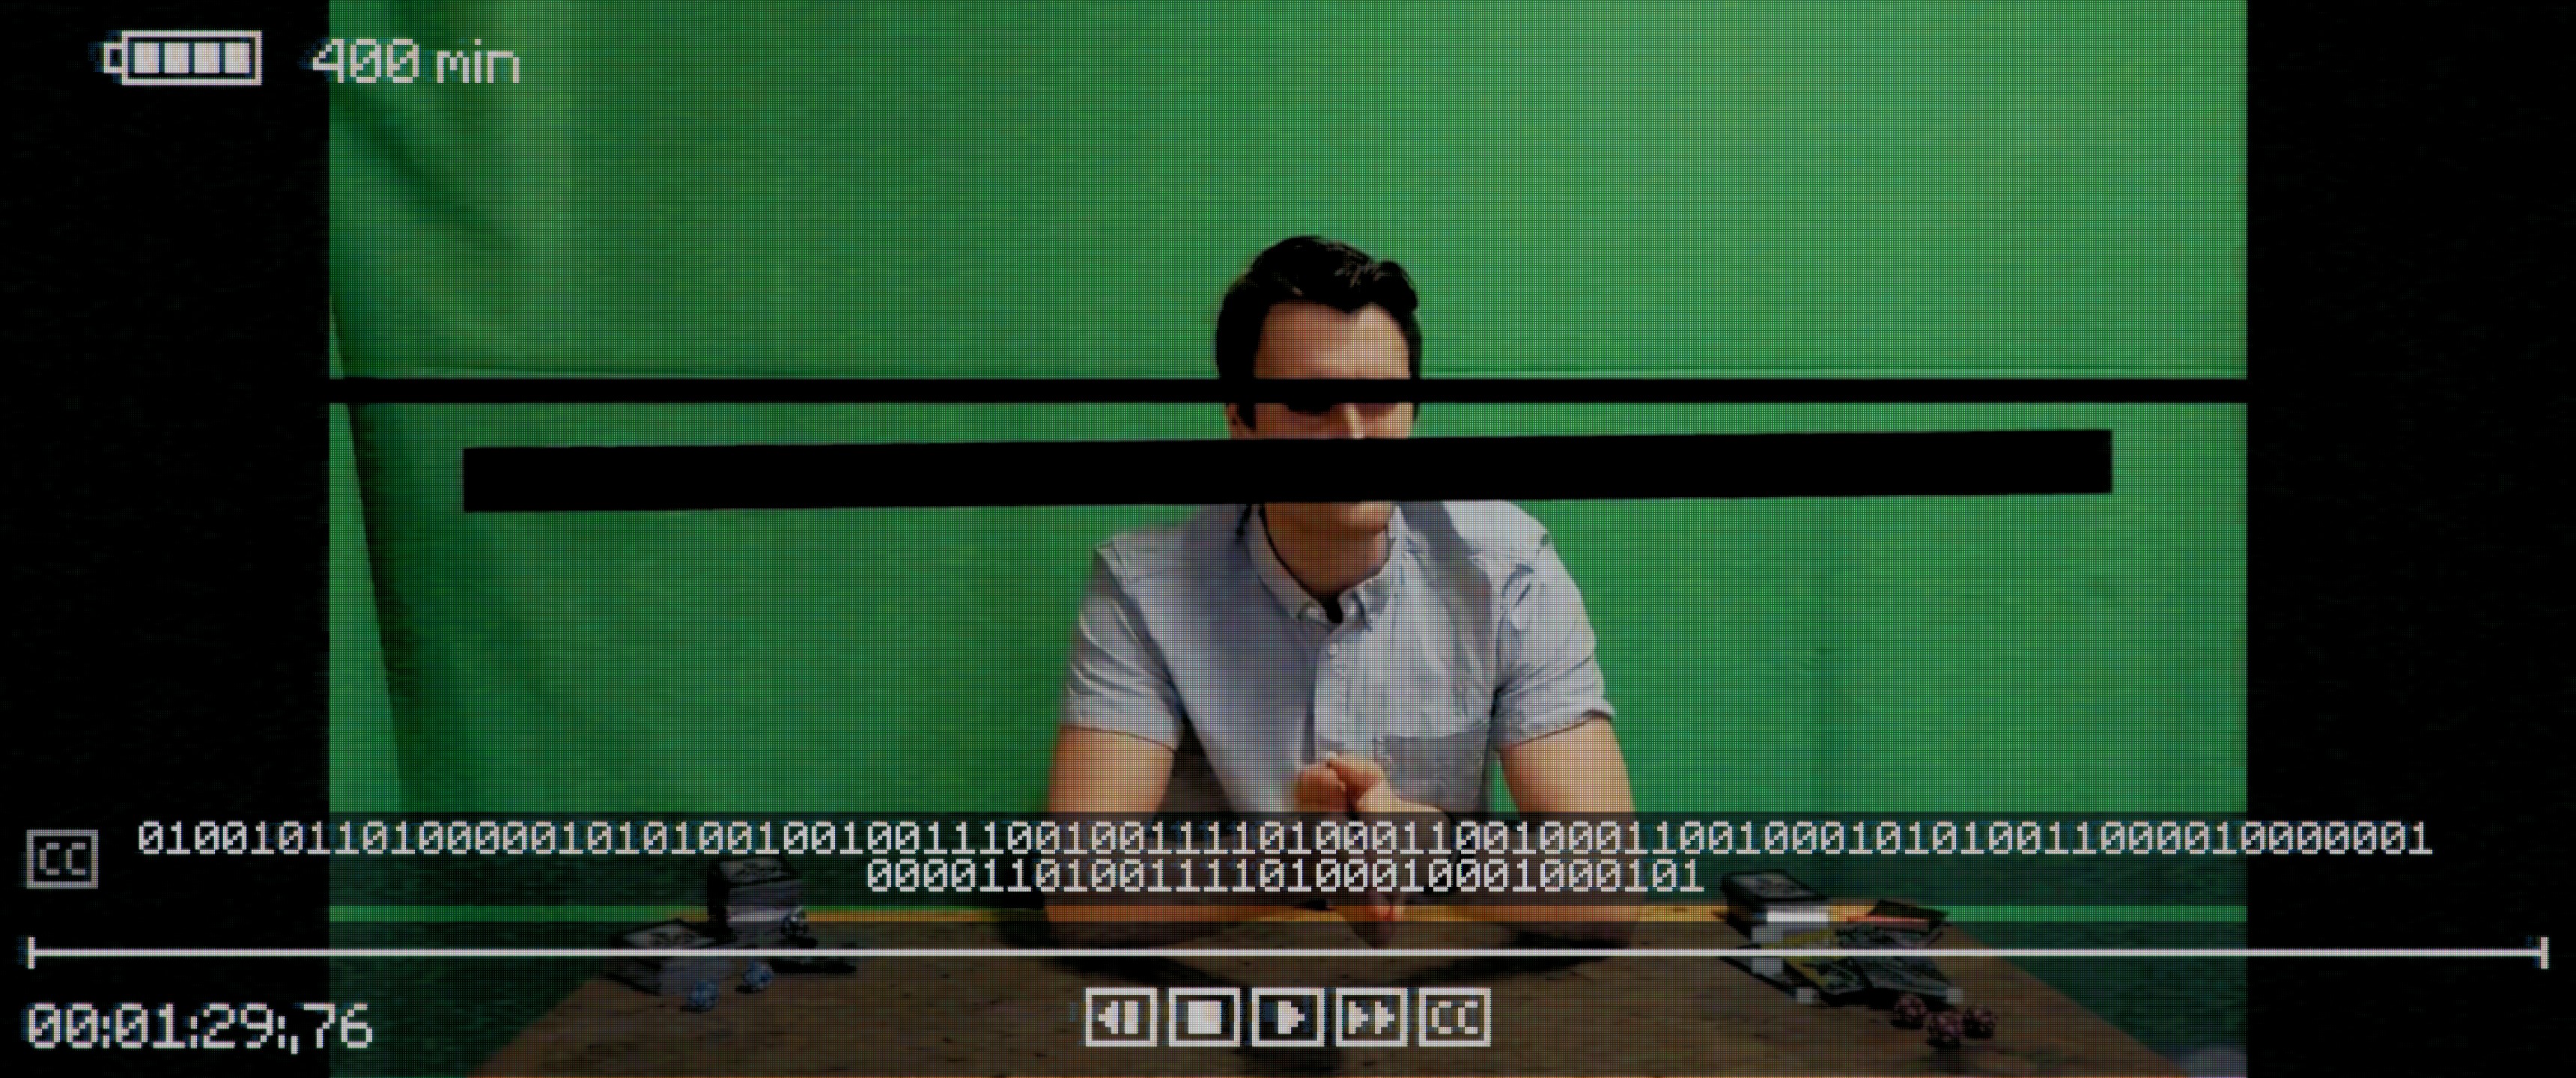 [Inscryption] Binary codes from videos image 1